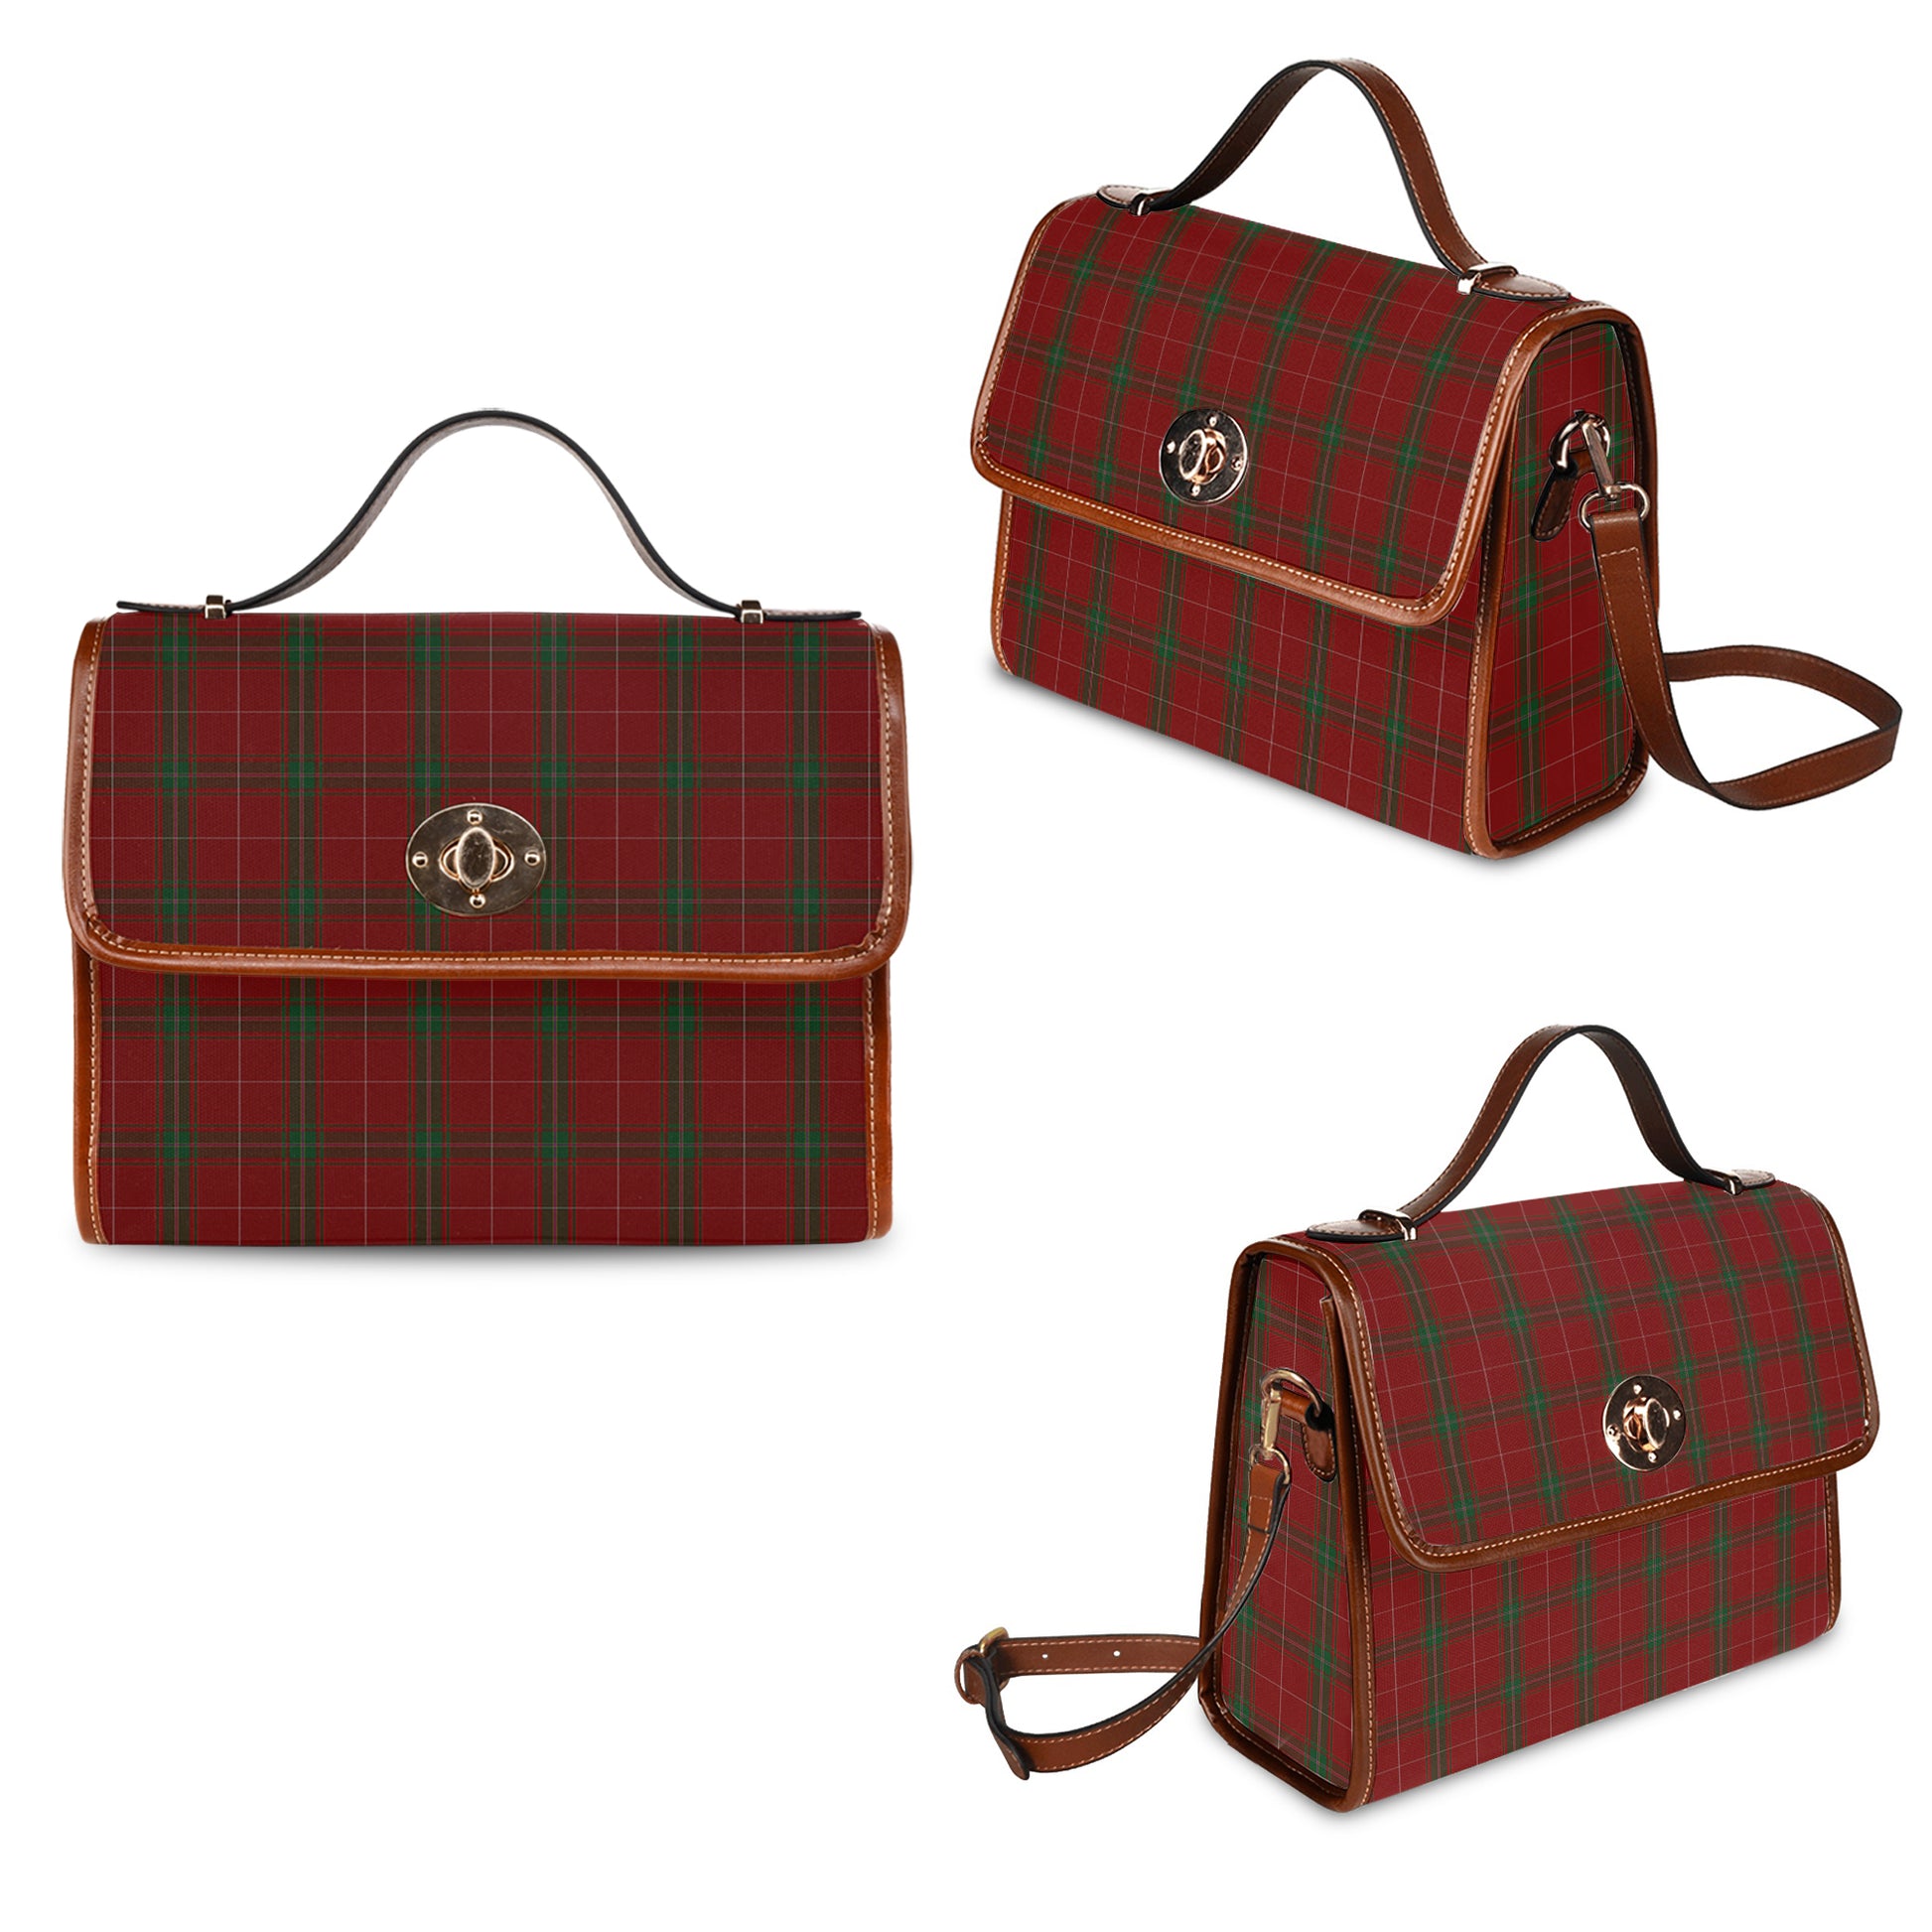 carruthers-tartan-leather-strap-waterproof-canvas-bag